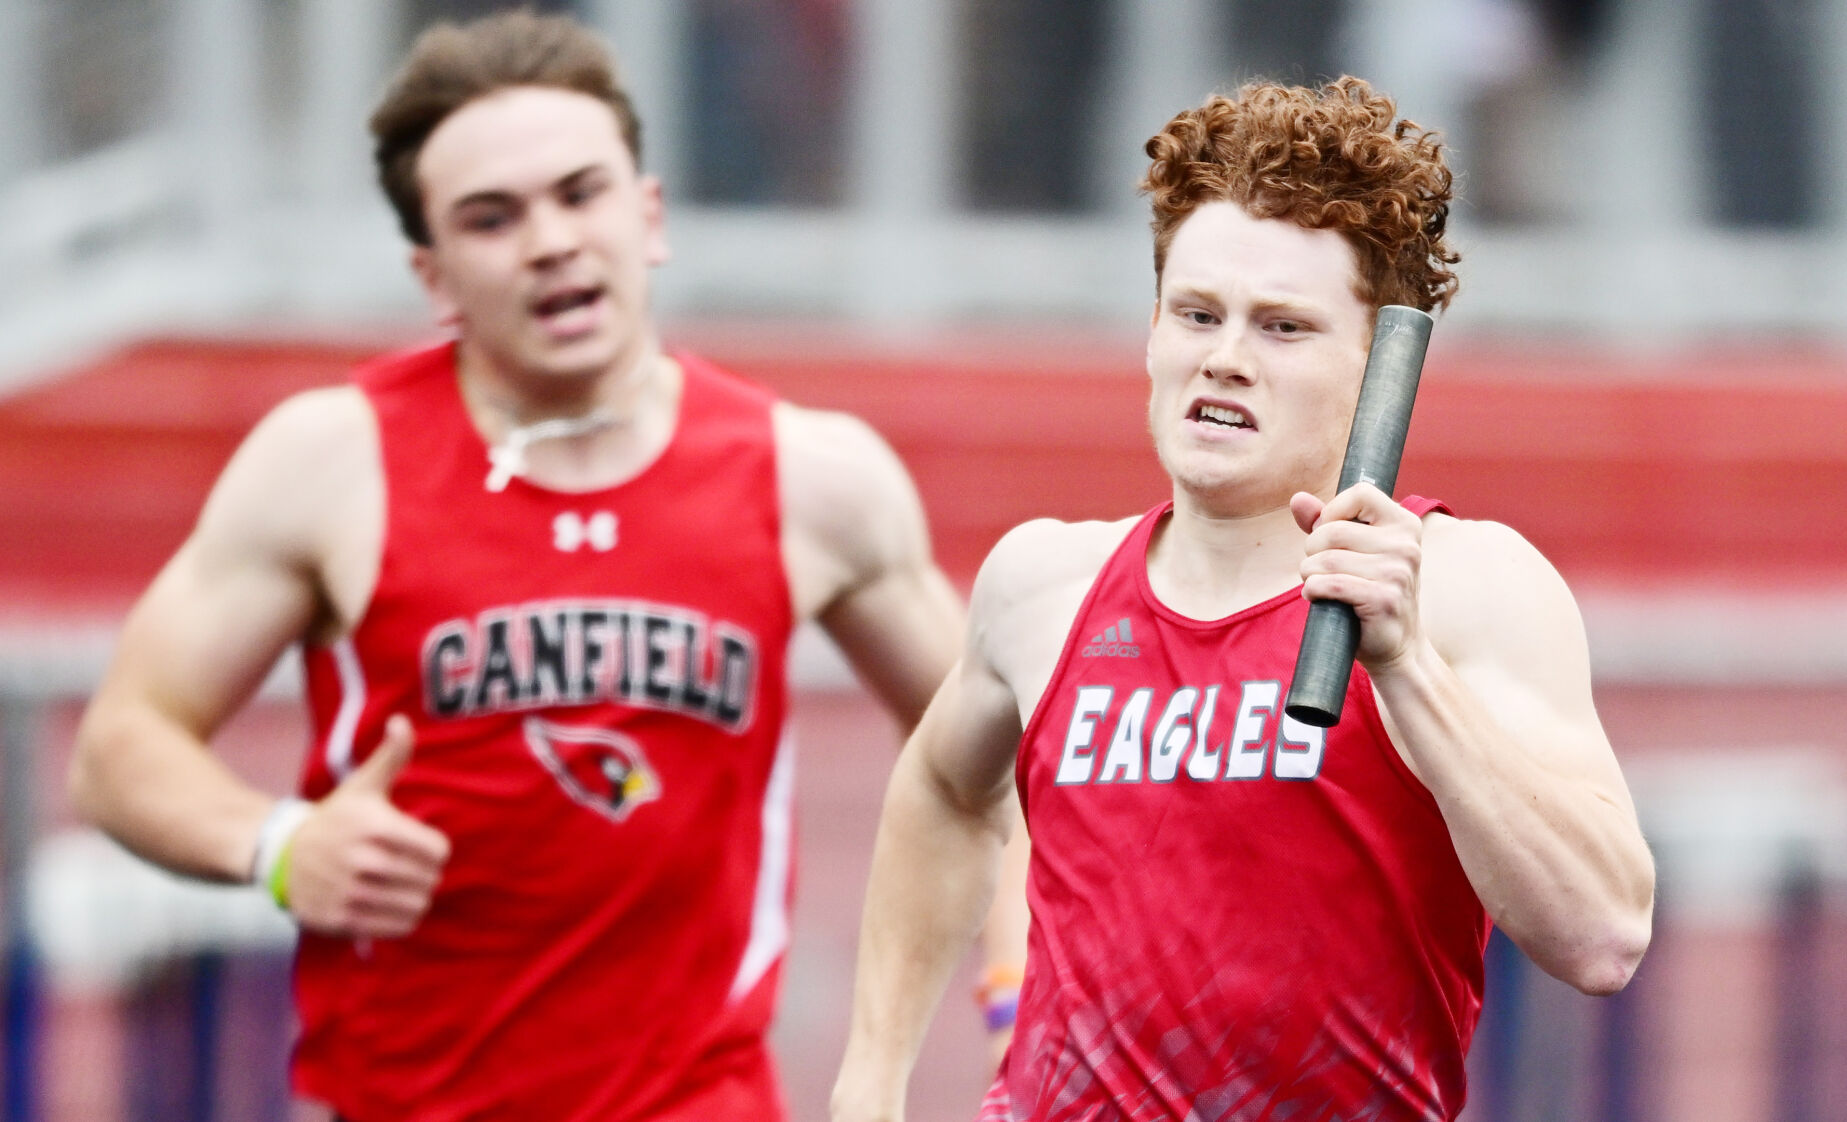 Eagles and Vikings Shine at District Meet, Pecore Excels in Pole Vaulting